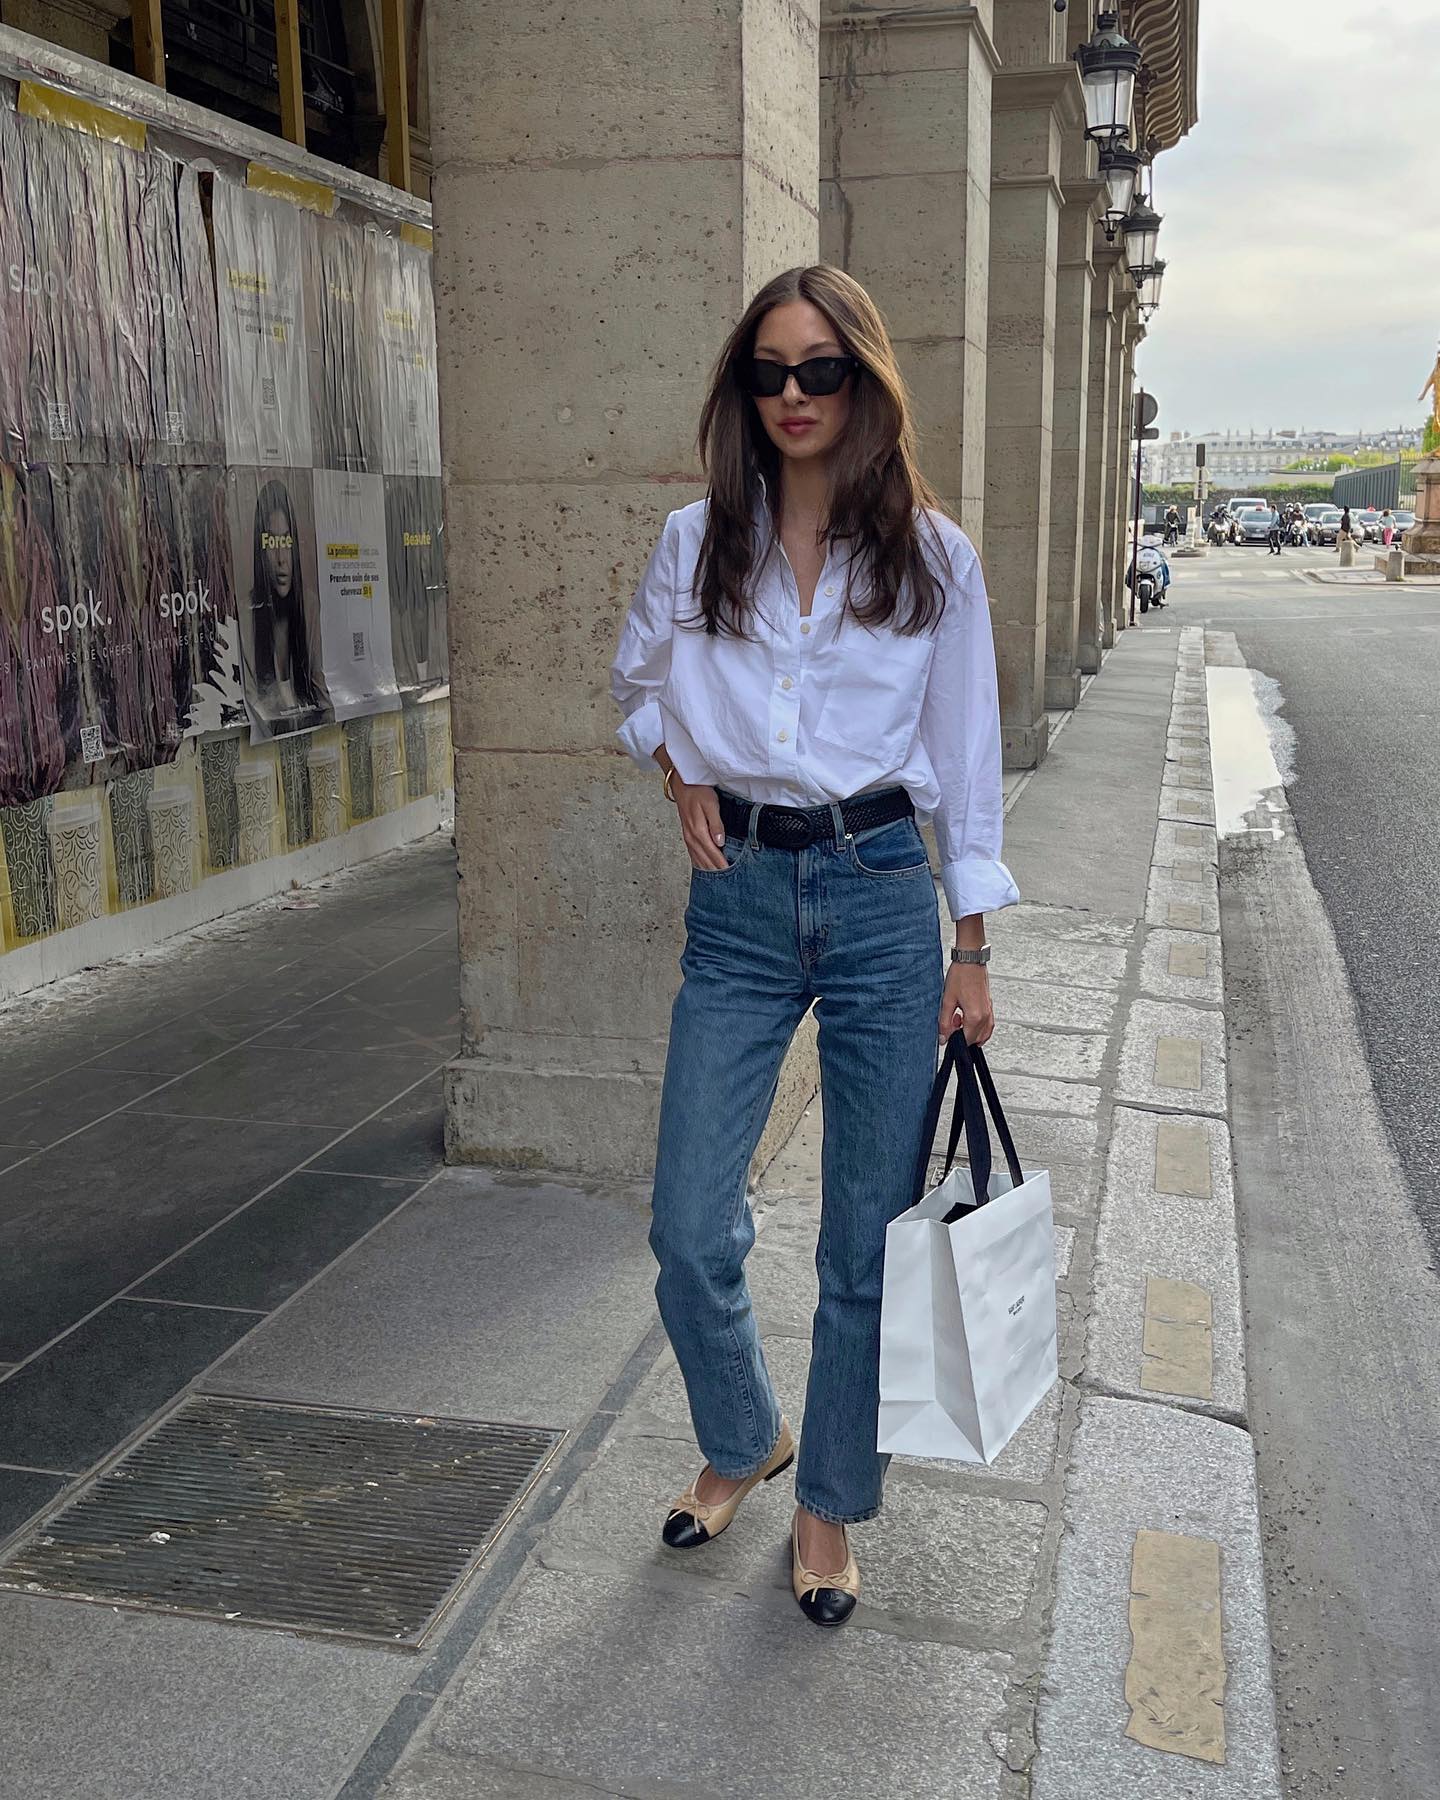 5 Chic Outfit Ideas Featuring Flats and Jeans | Who What Wear